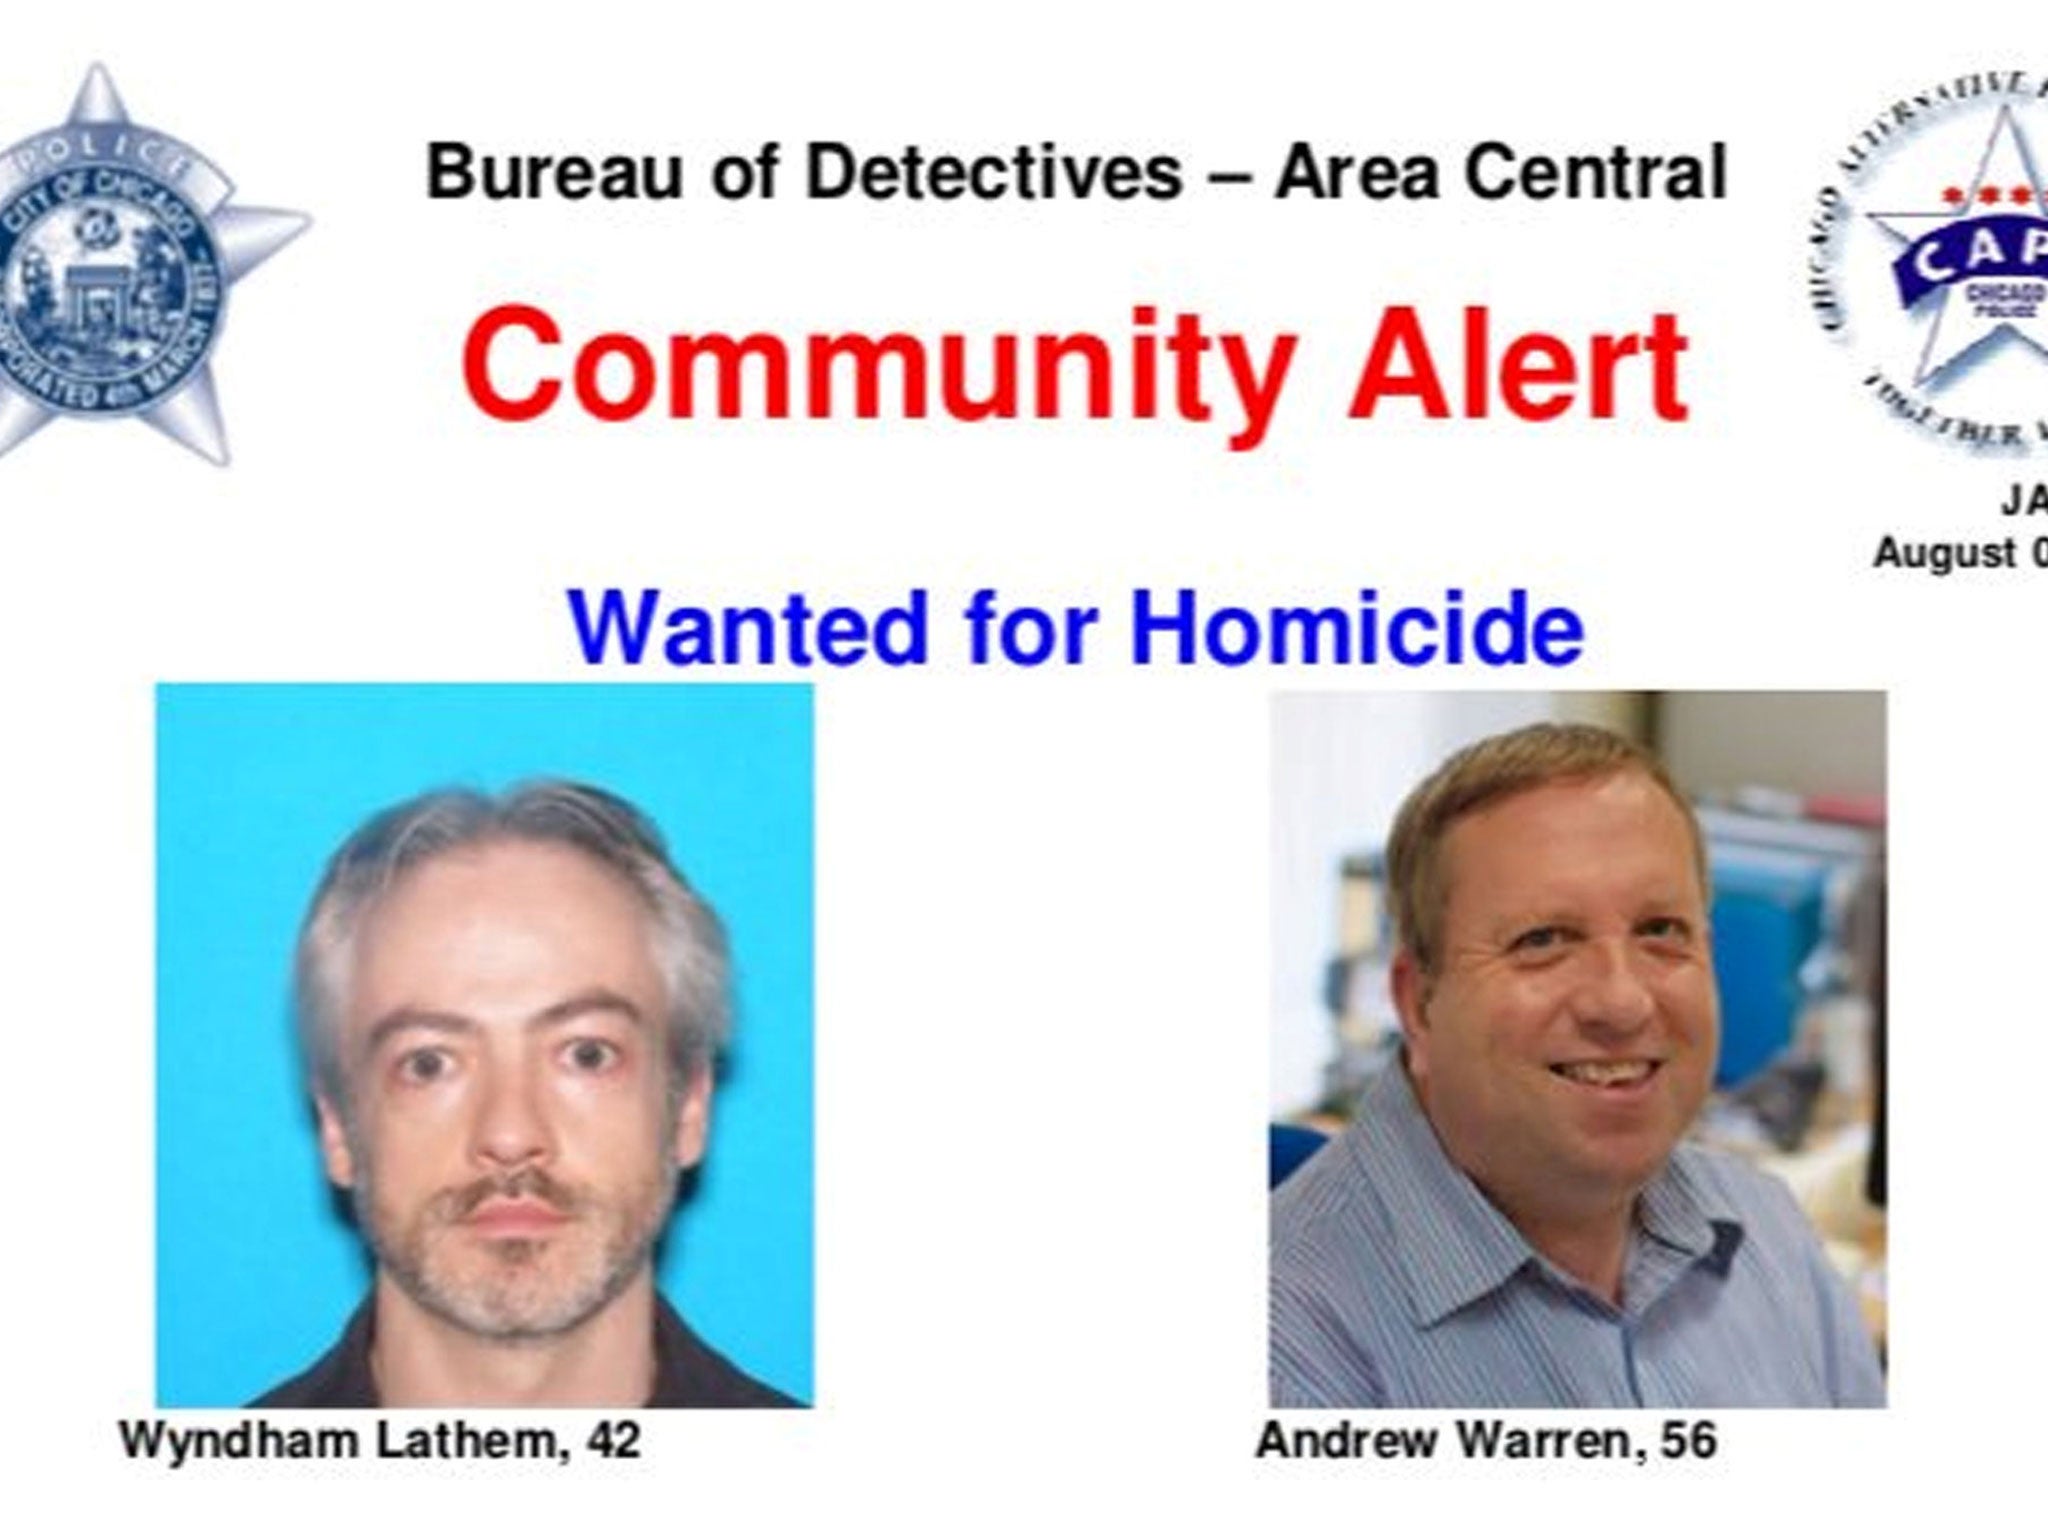 The wanted poster distributed by Chicago Police